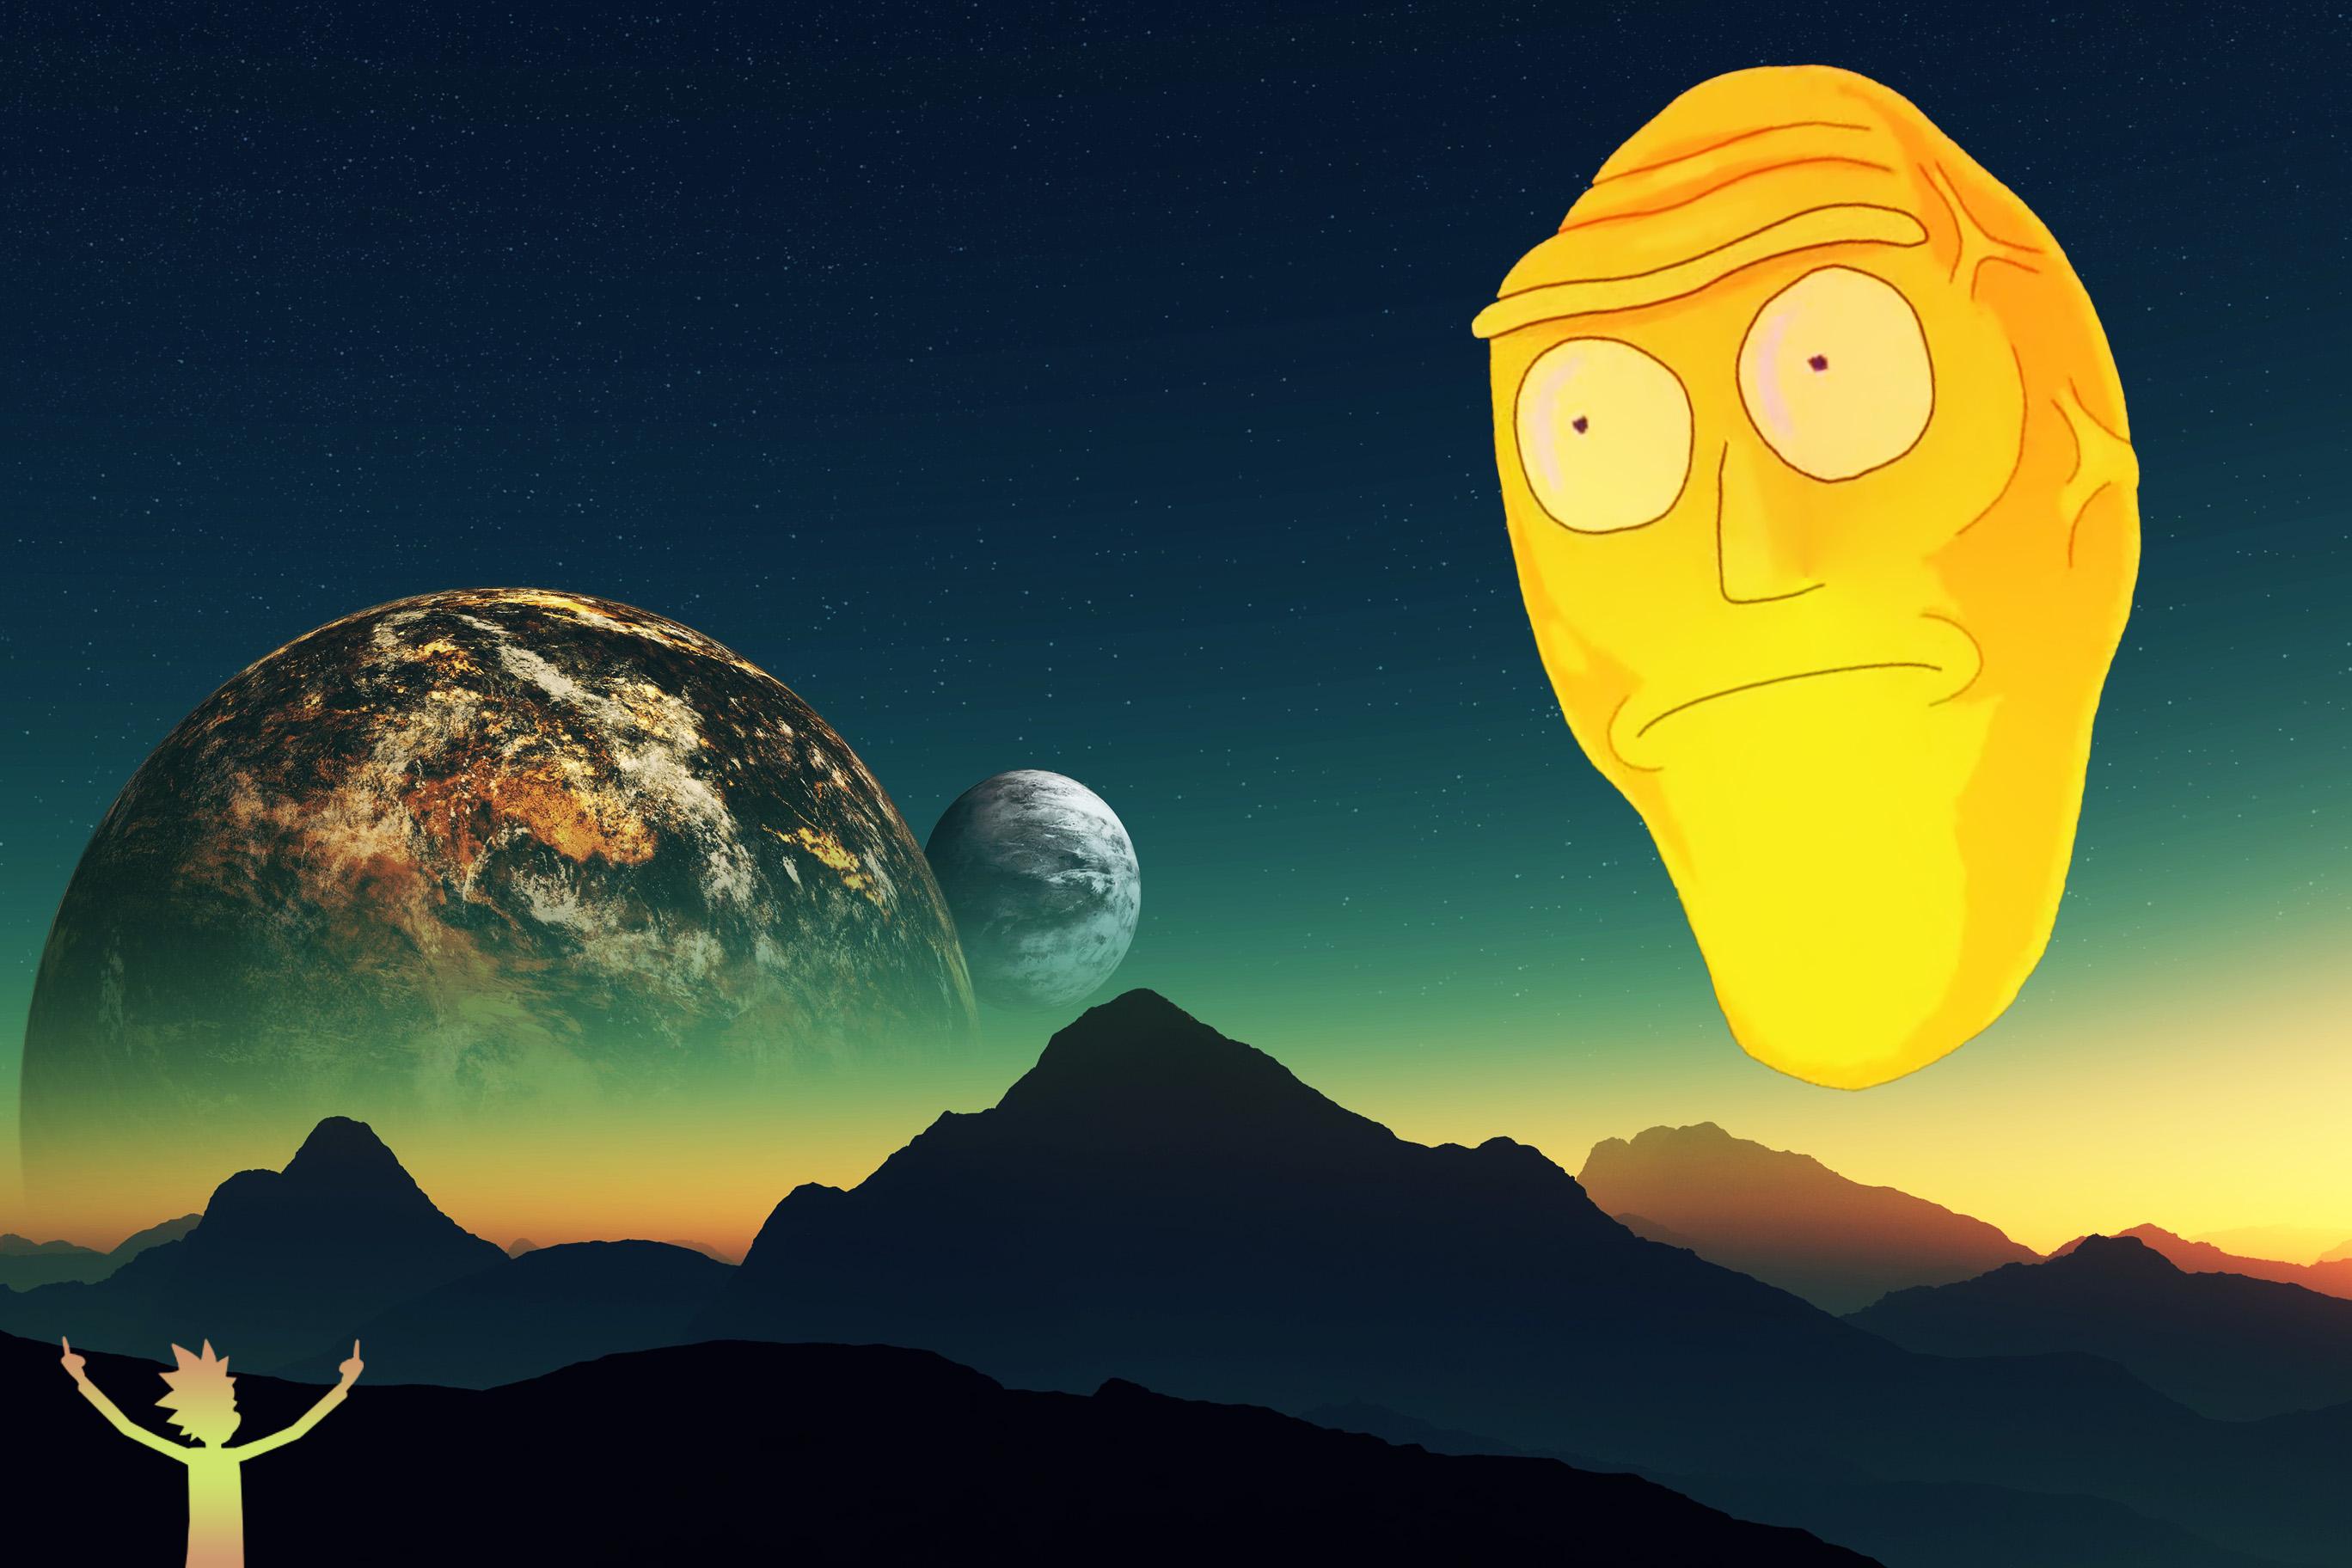 In addition to my phone background I made a 2736x1824 desktop wallpaper: rickandmorty